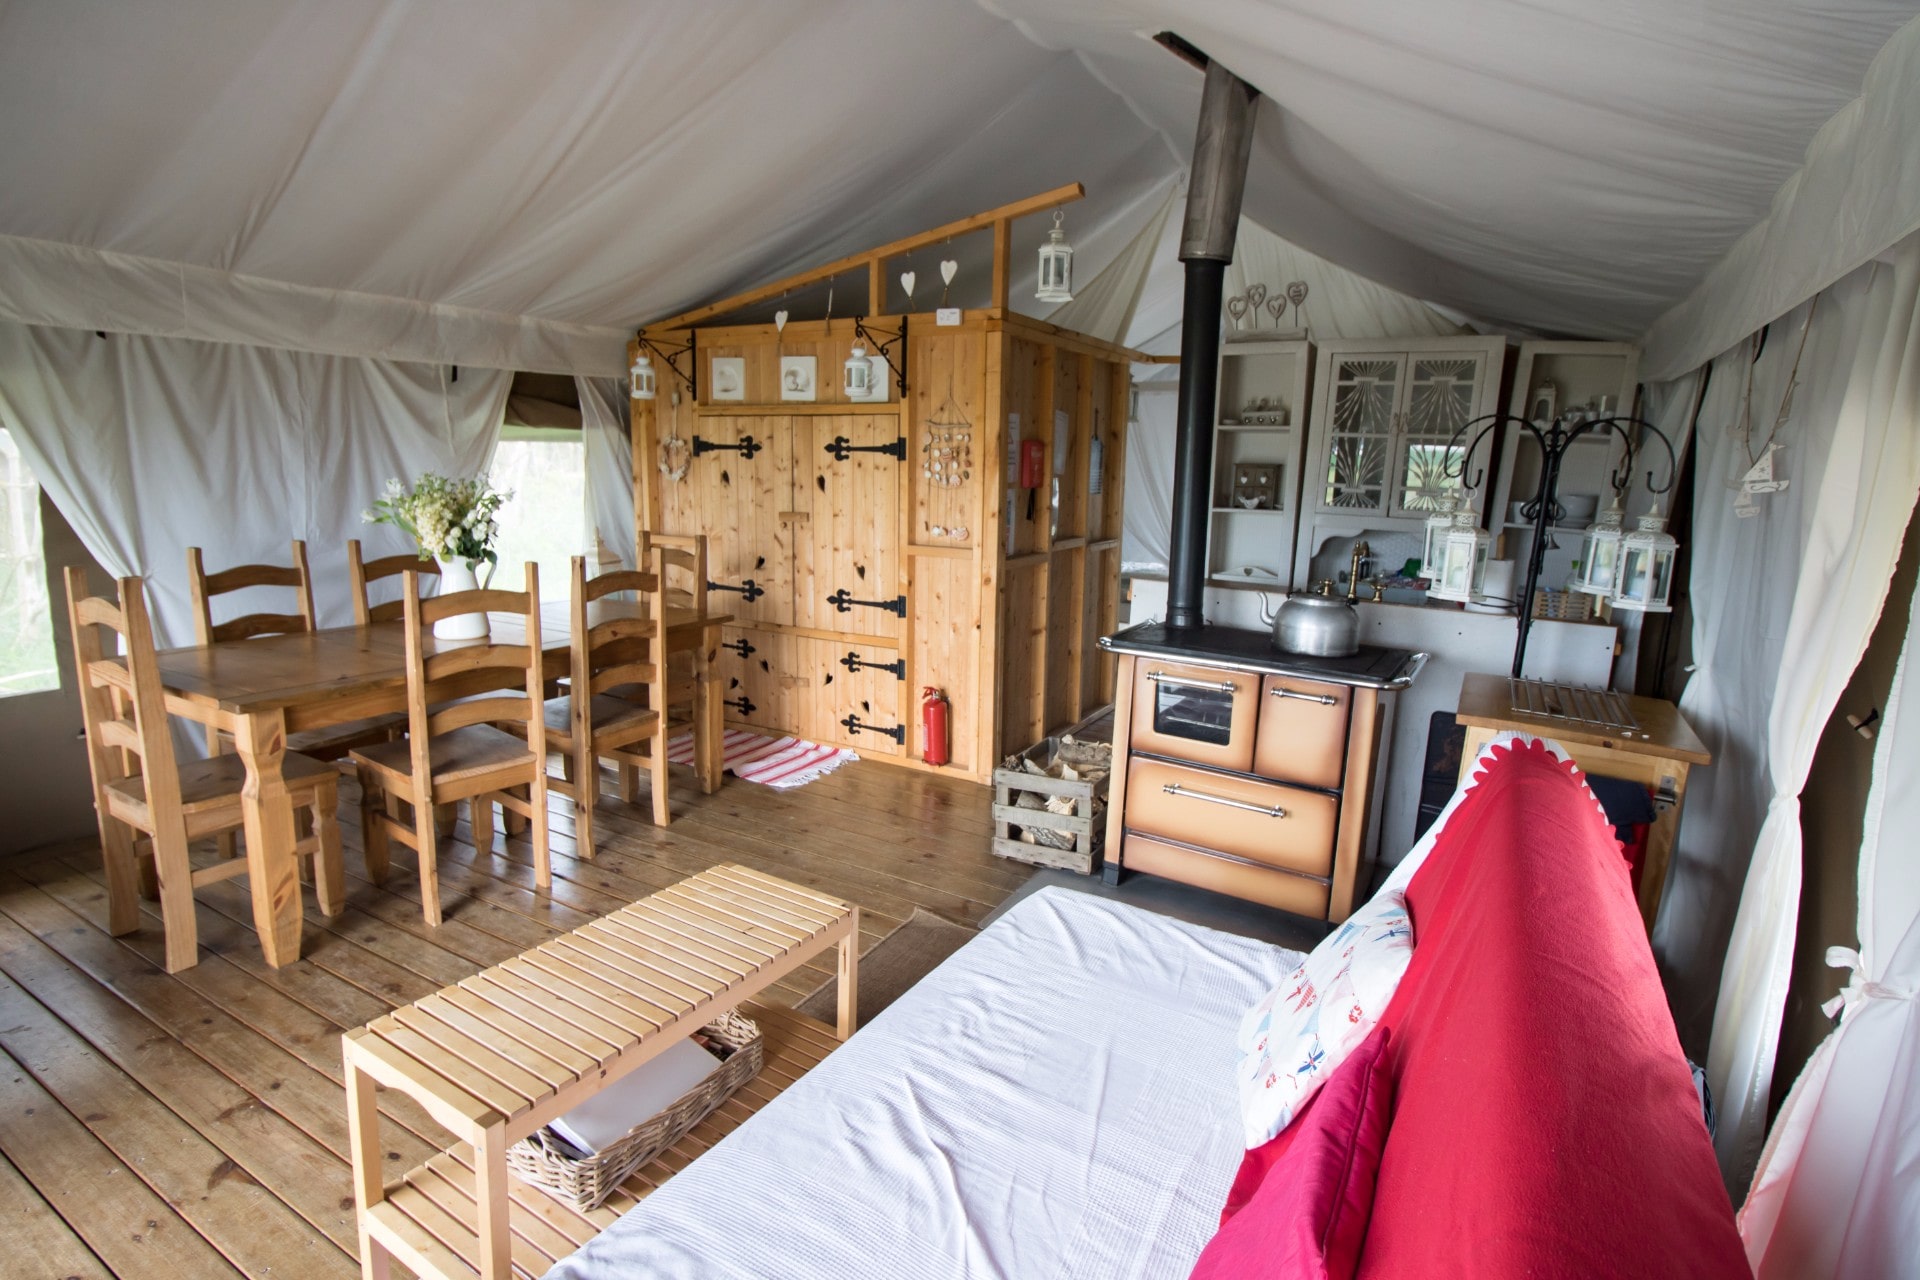 inside-a-safari-tent-glamping-site-with-kitchen-bed-table-and-sofa-harvest-moon-holidays-scotland-unusual-romantic-weekend-breaks-uk